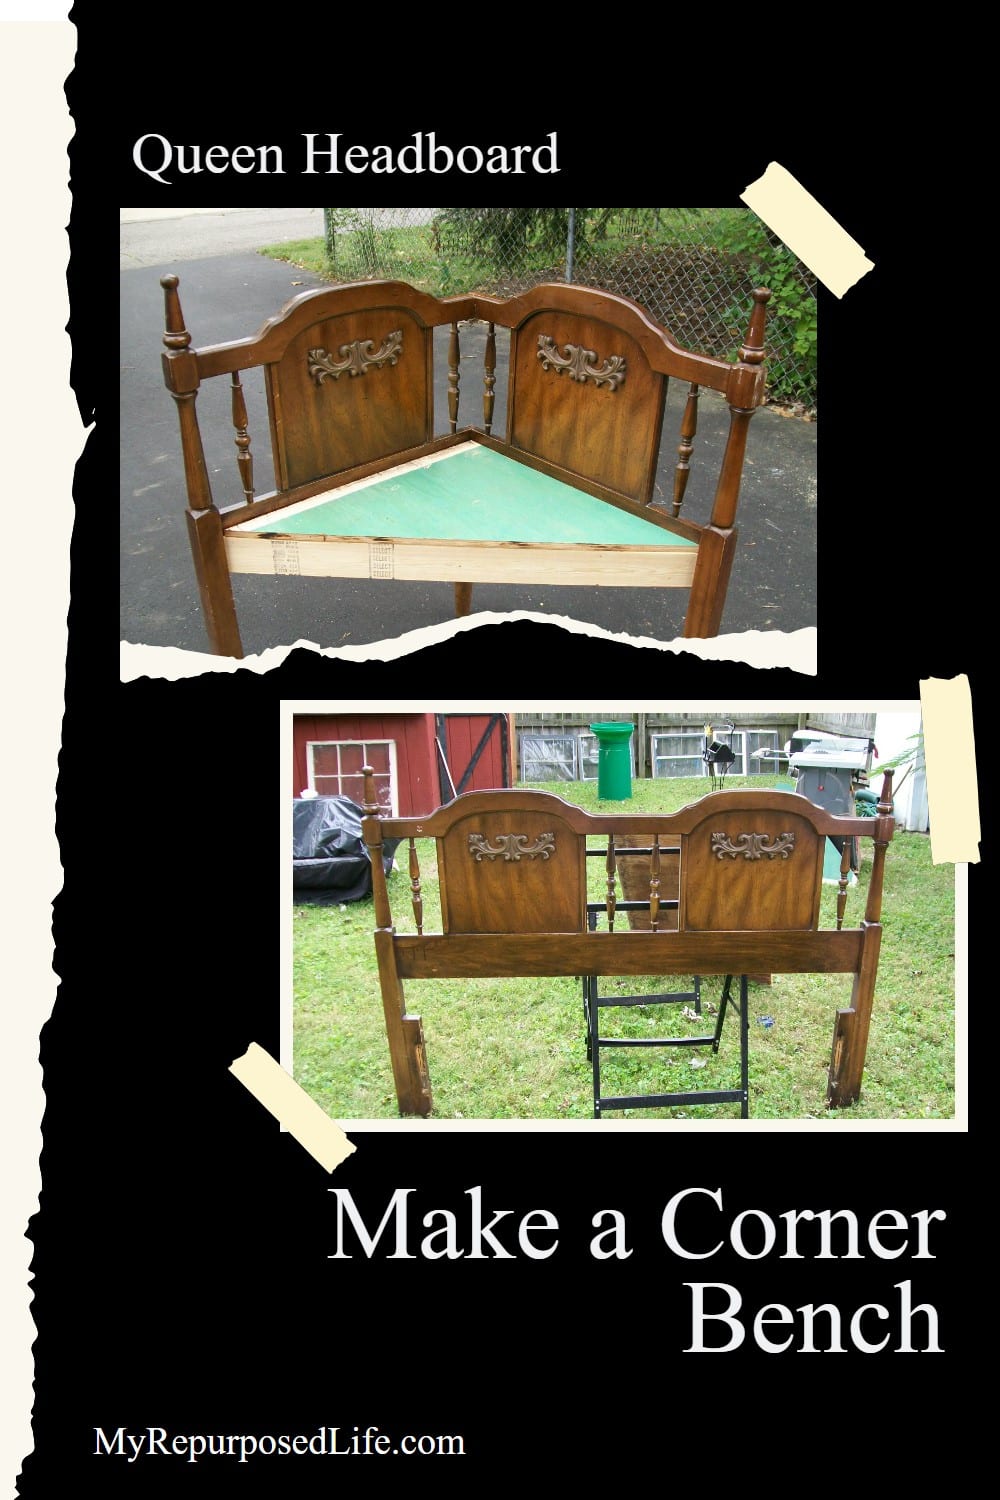 A large headboard is perfect for making a corner bench. Cut the large headboard in half and add a third leg and voila you have the perfect corner bench. #MyRepurposedLife #upcycle #repurpose #headboard #cornerbench #diy #tutorial via @repurposedlife